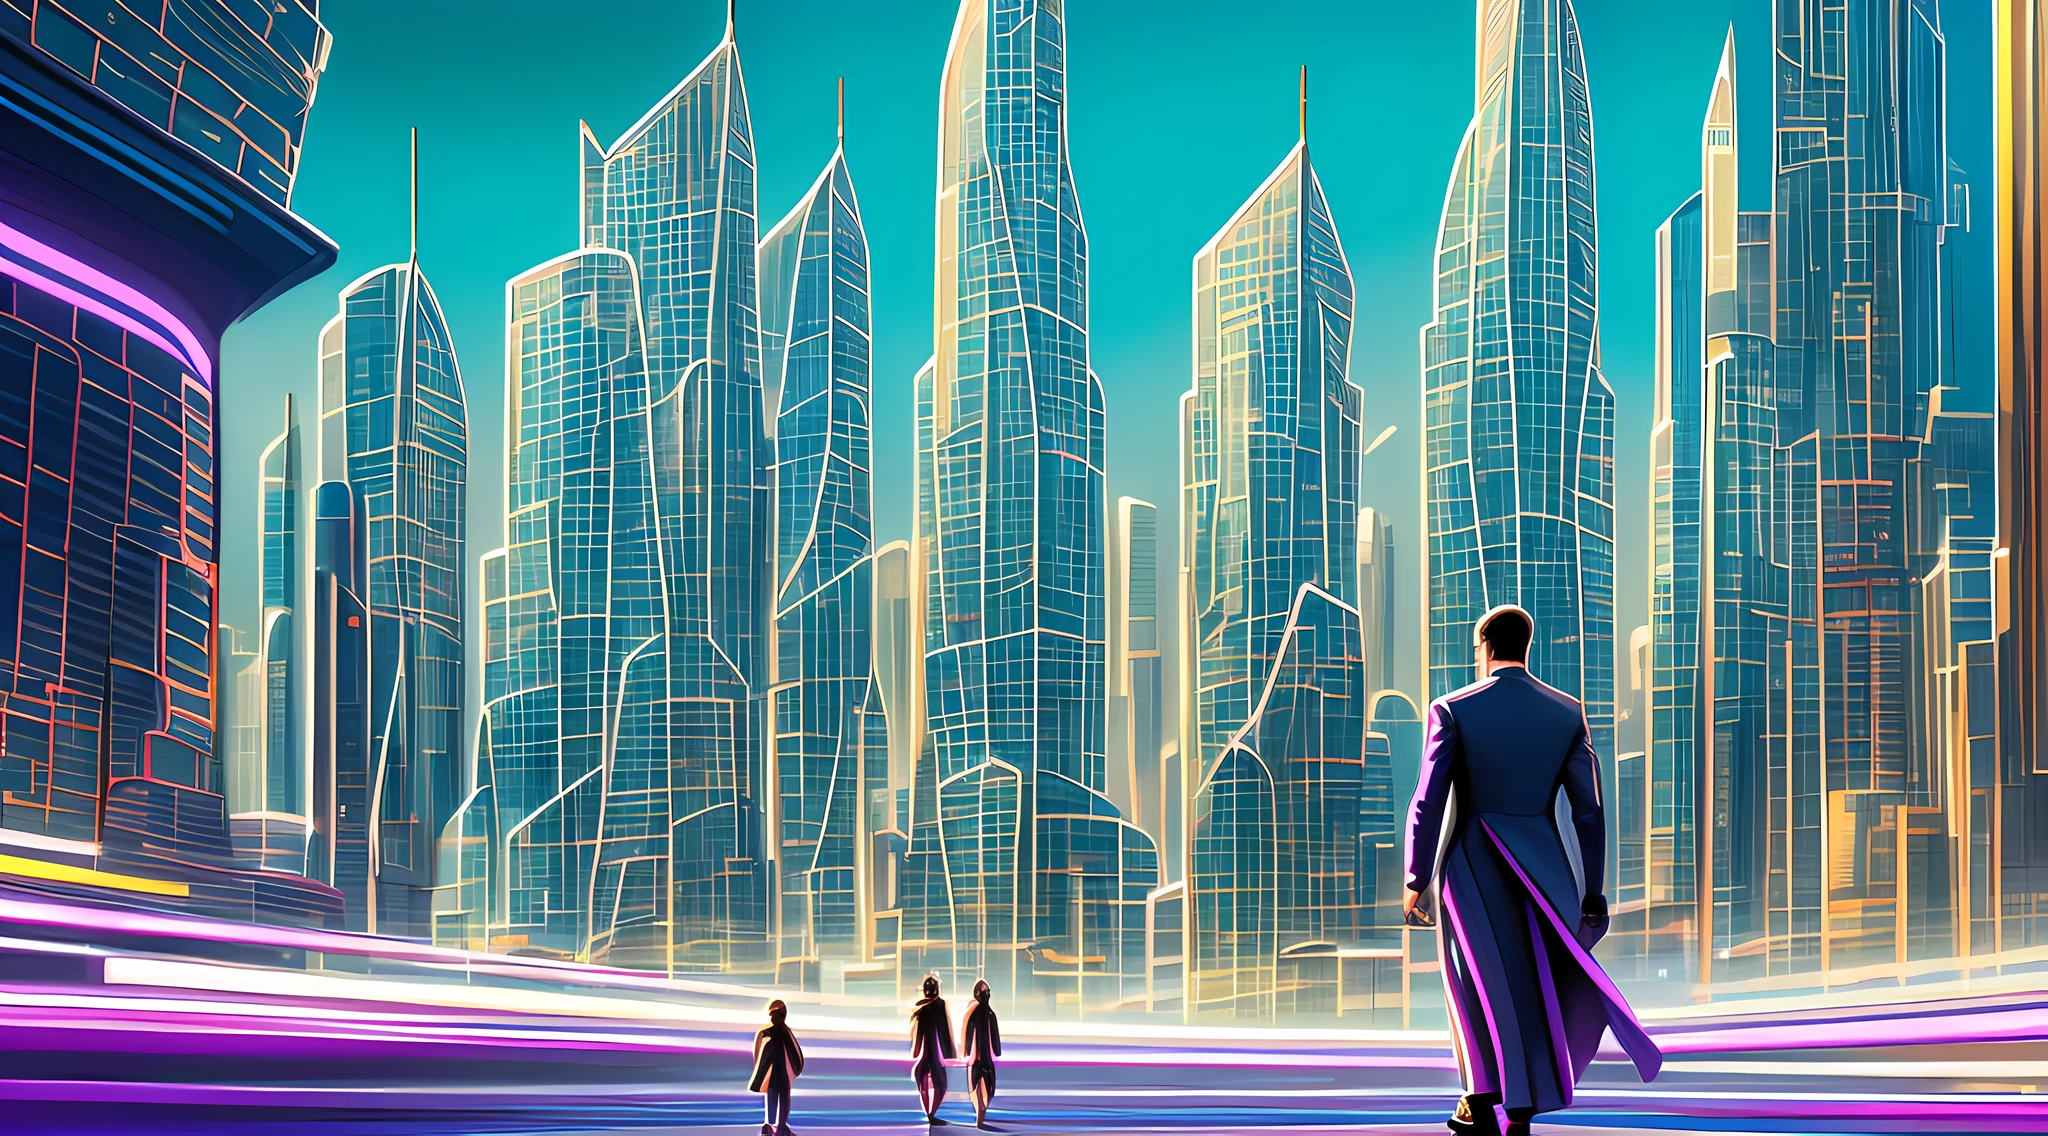 An oil painting of a futuristic cityscape, with towering skyscrapers and flying vehicles filling the frame. The colors are bright and vibrant, with shades of blue, green, and purple dominating the scene. In the foreground, a group of people can be seen walking towards a giant, glowing pyramid.